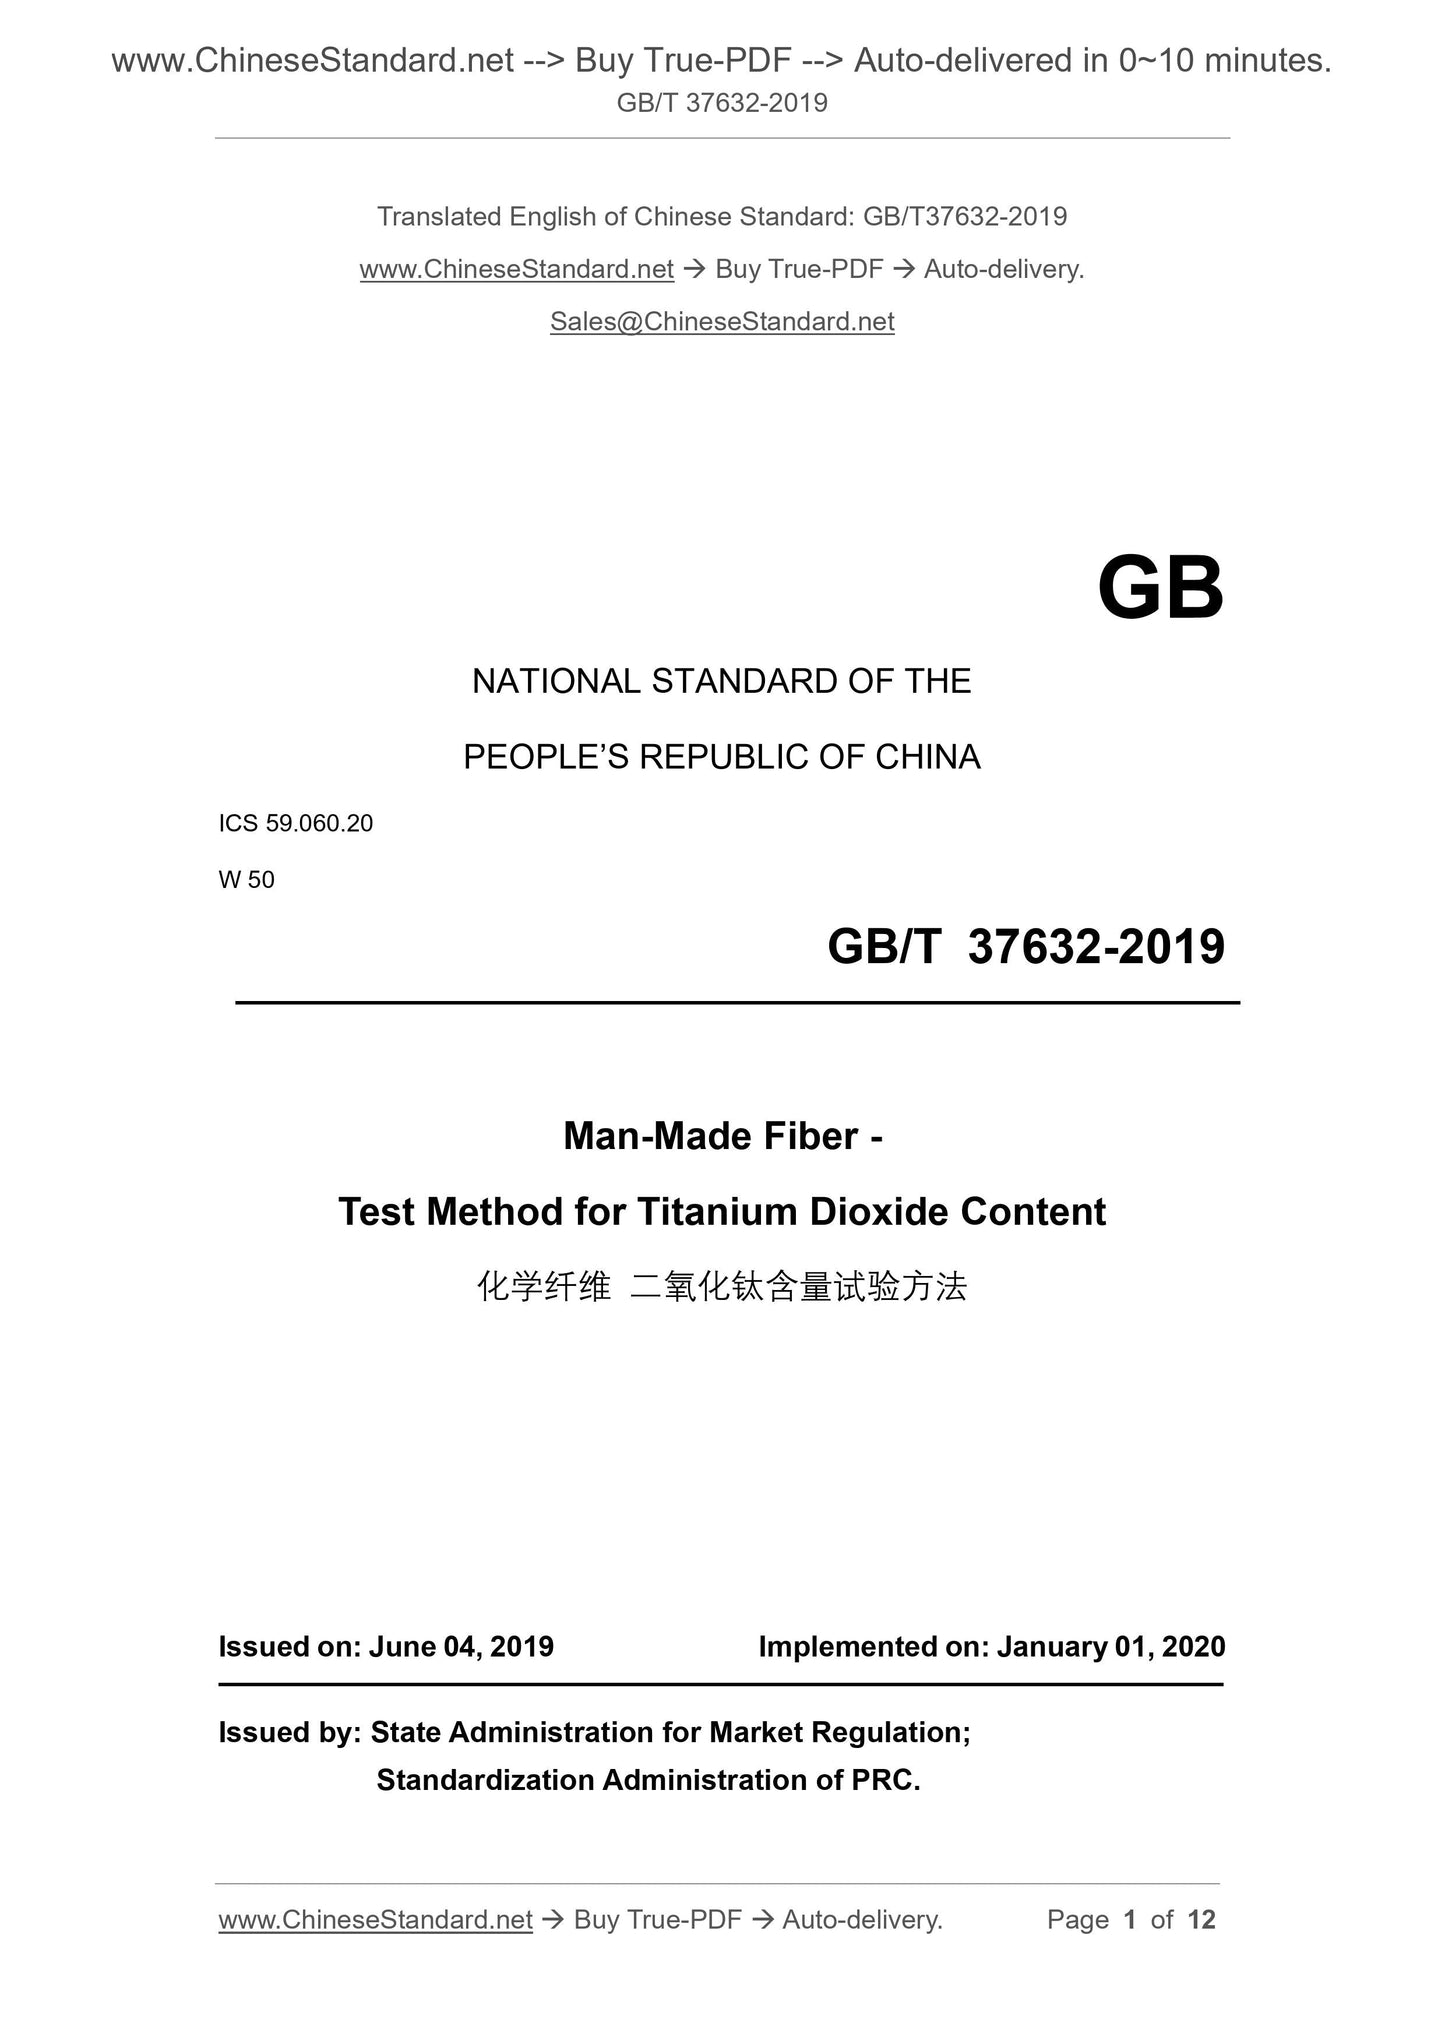 GB/T 37632-2019 Page 1